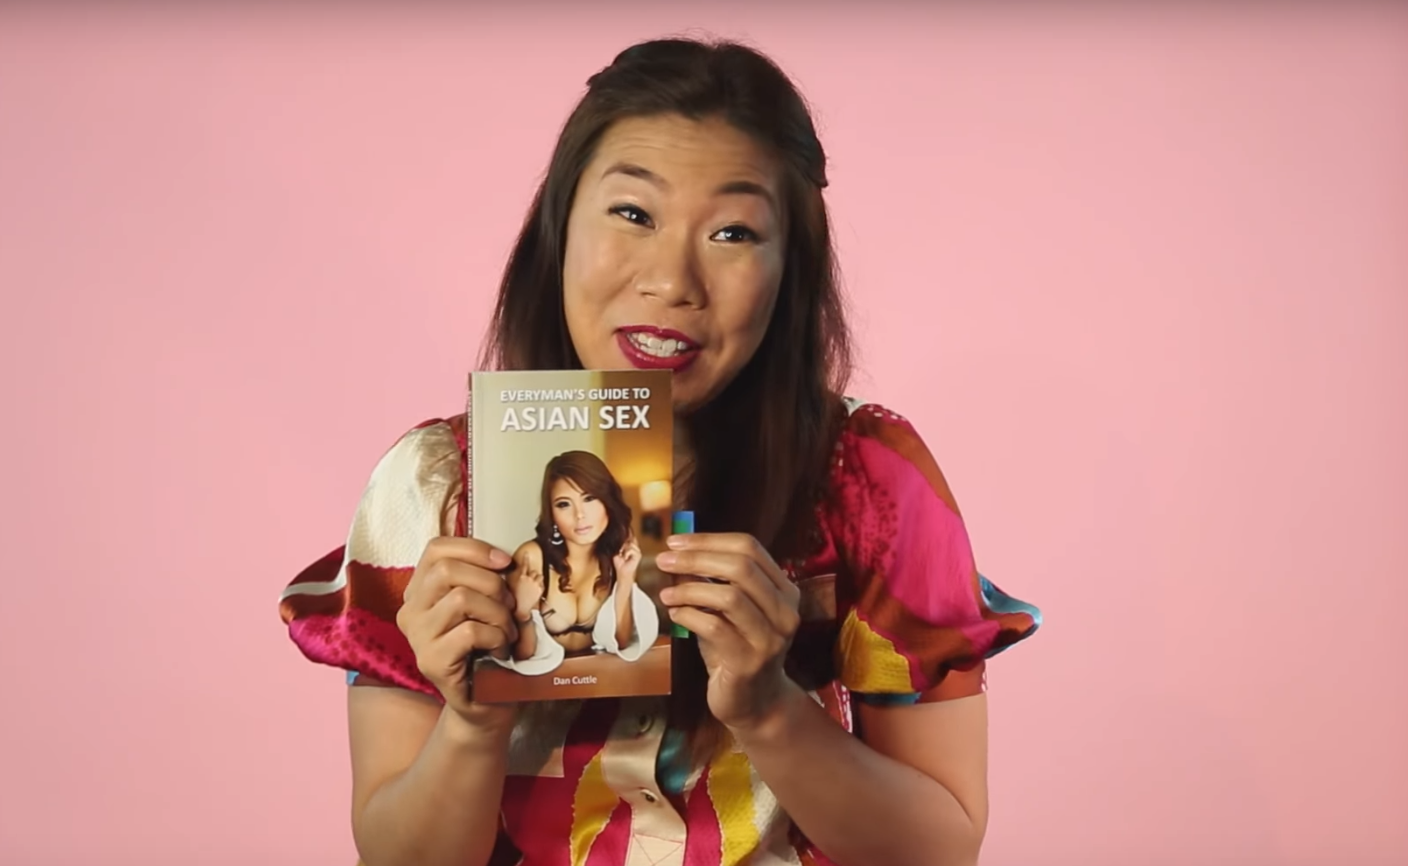 Asian woman hilariously mocks men who write How to pick up Asian women books The Independent The Independent photo